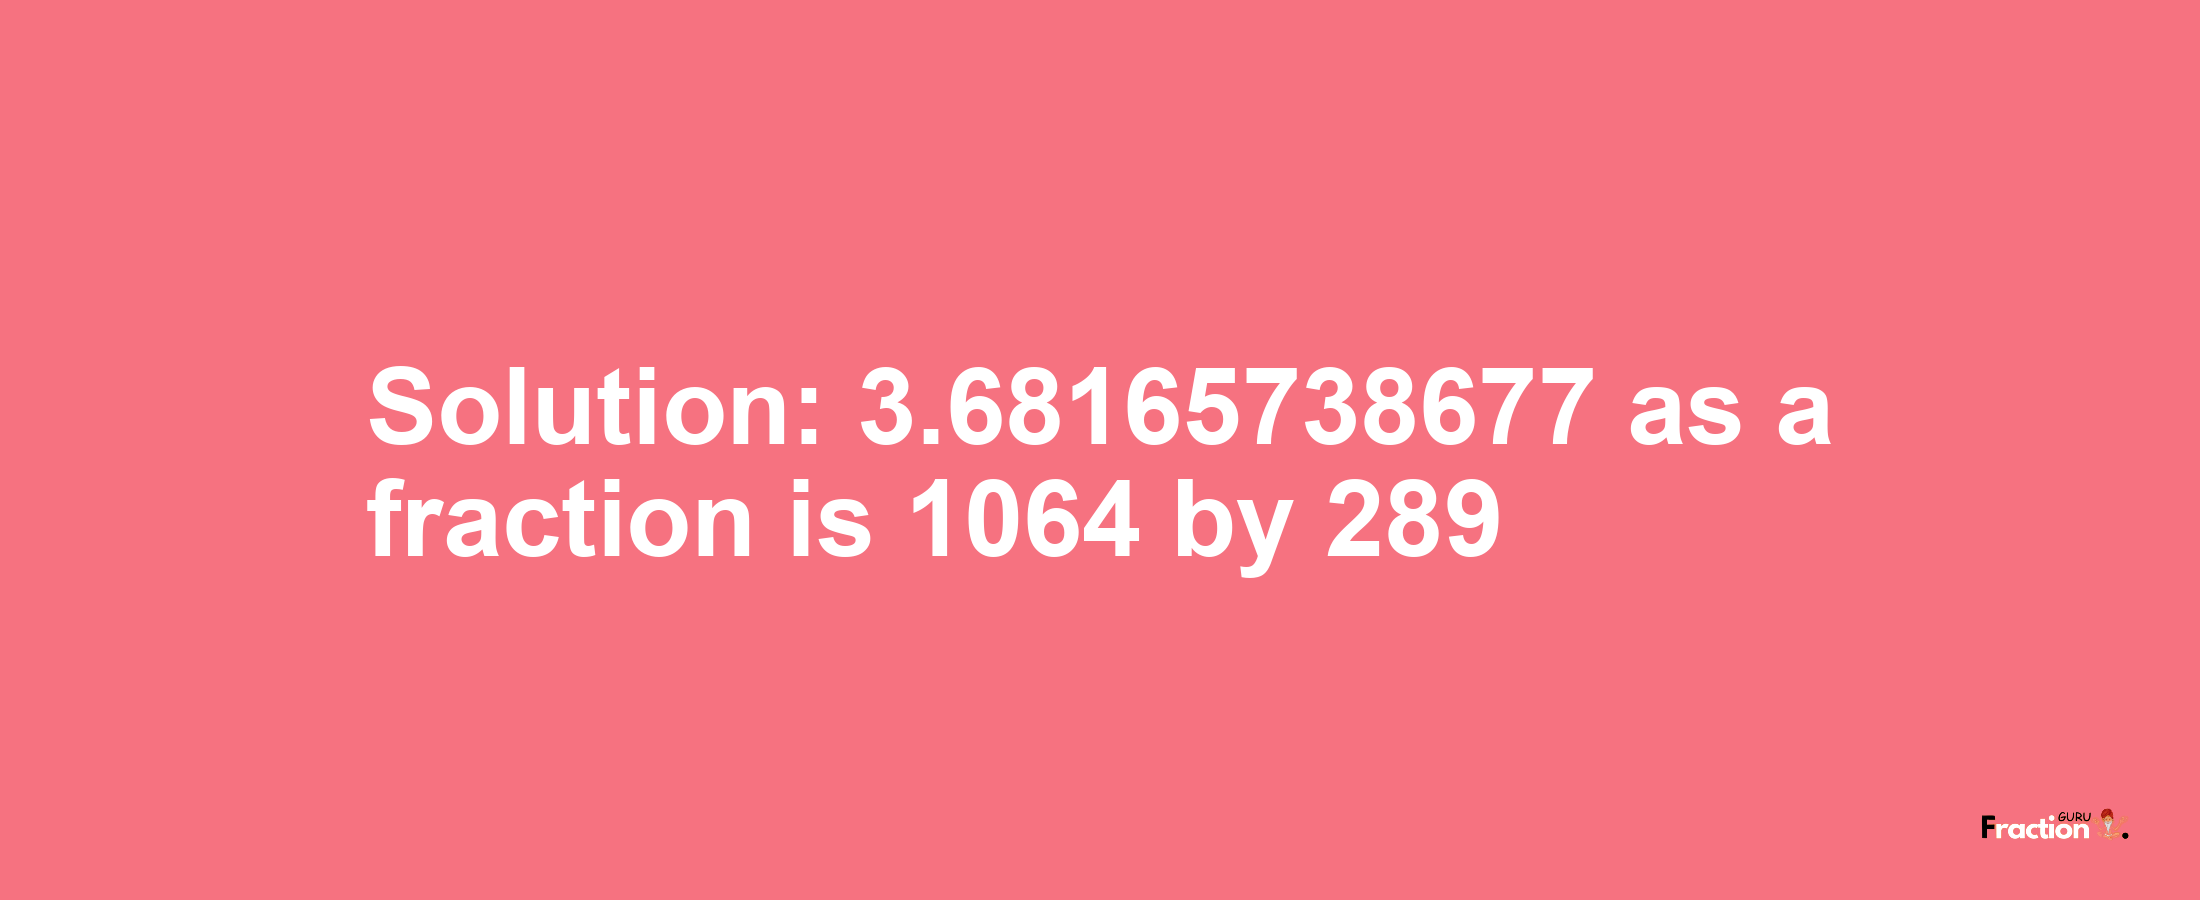 Solution:3.68165738677 as a fraction is 1064/289